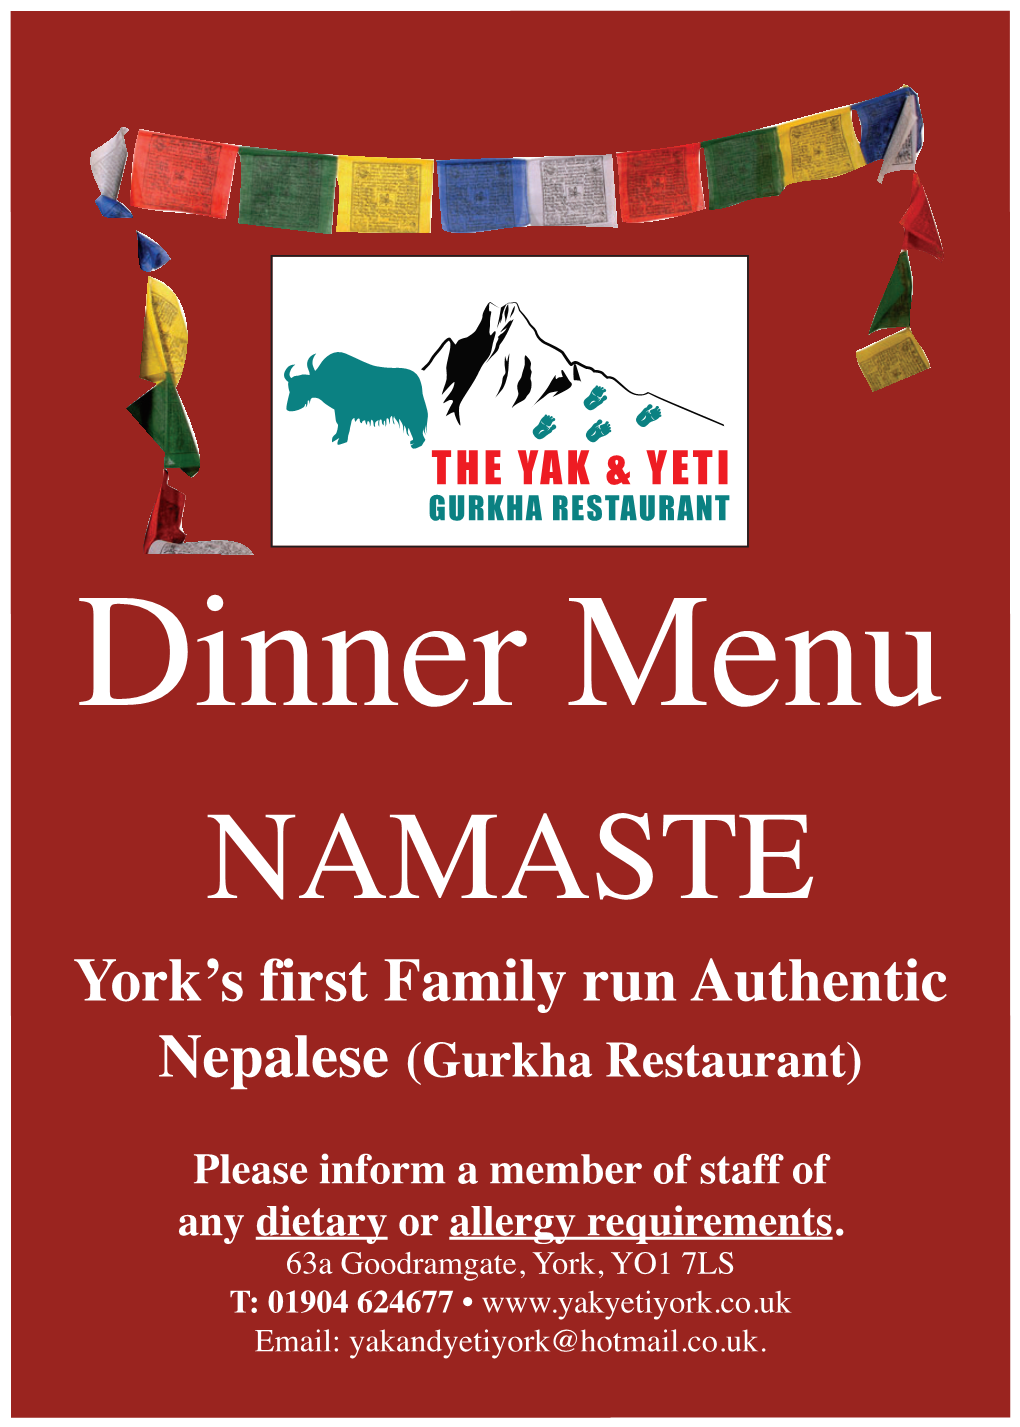 York's First Family Run Authentic Nepalese